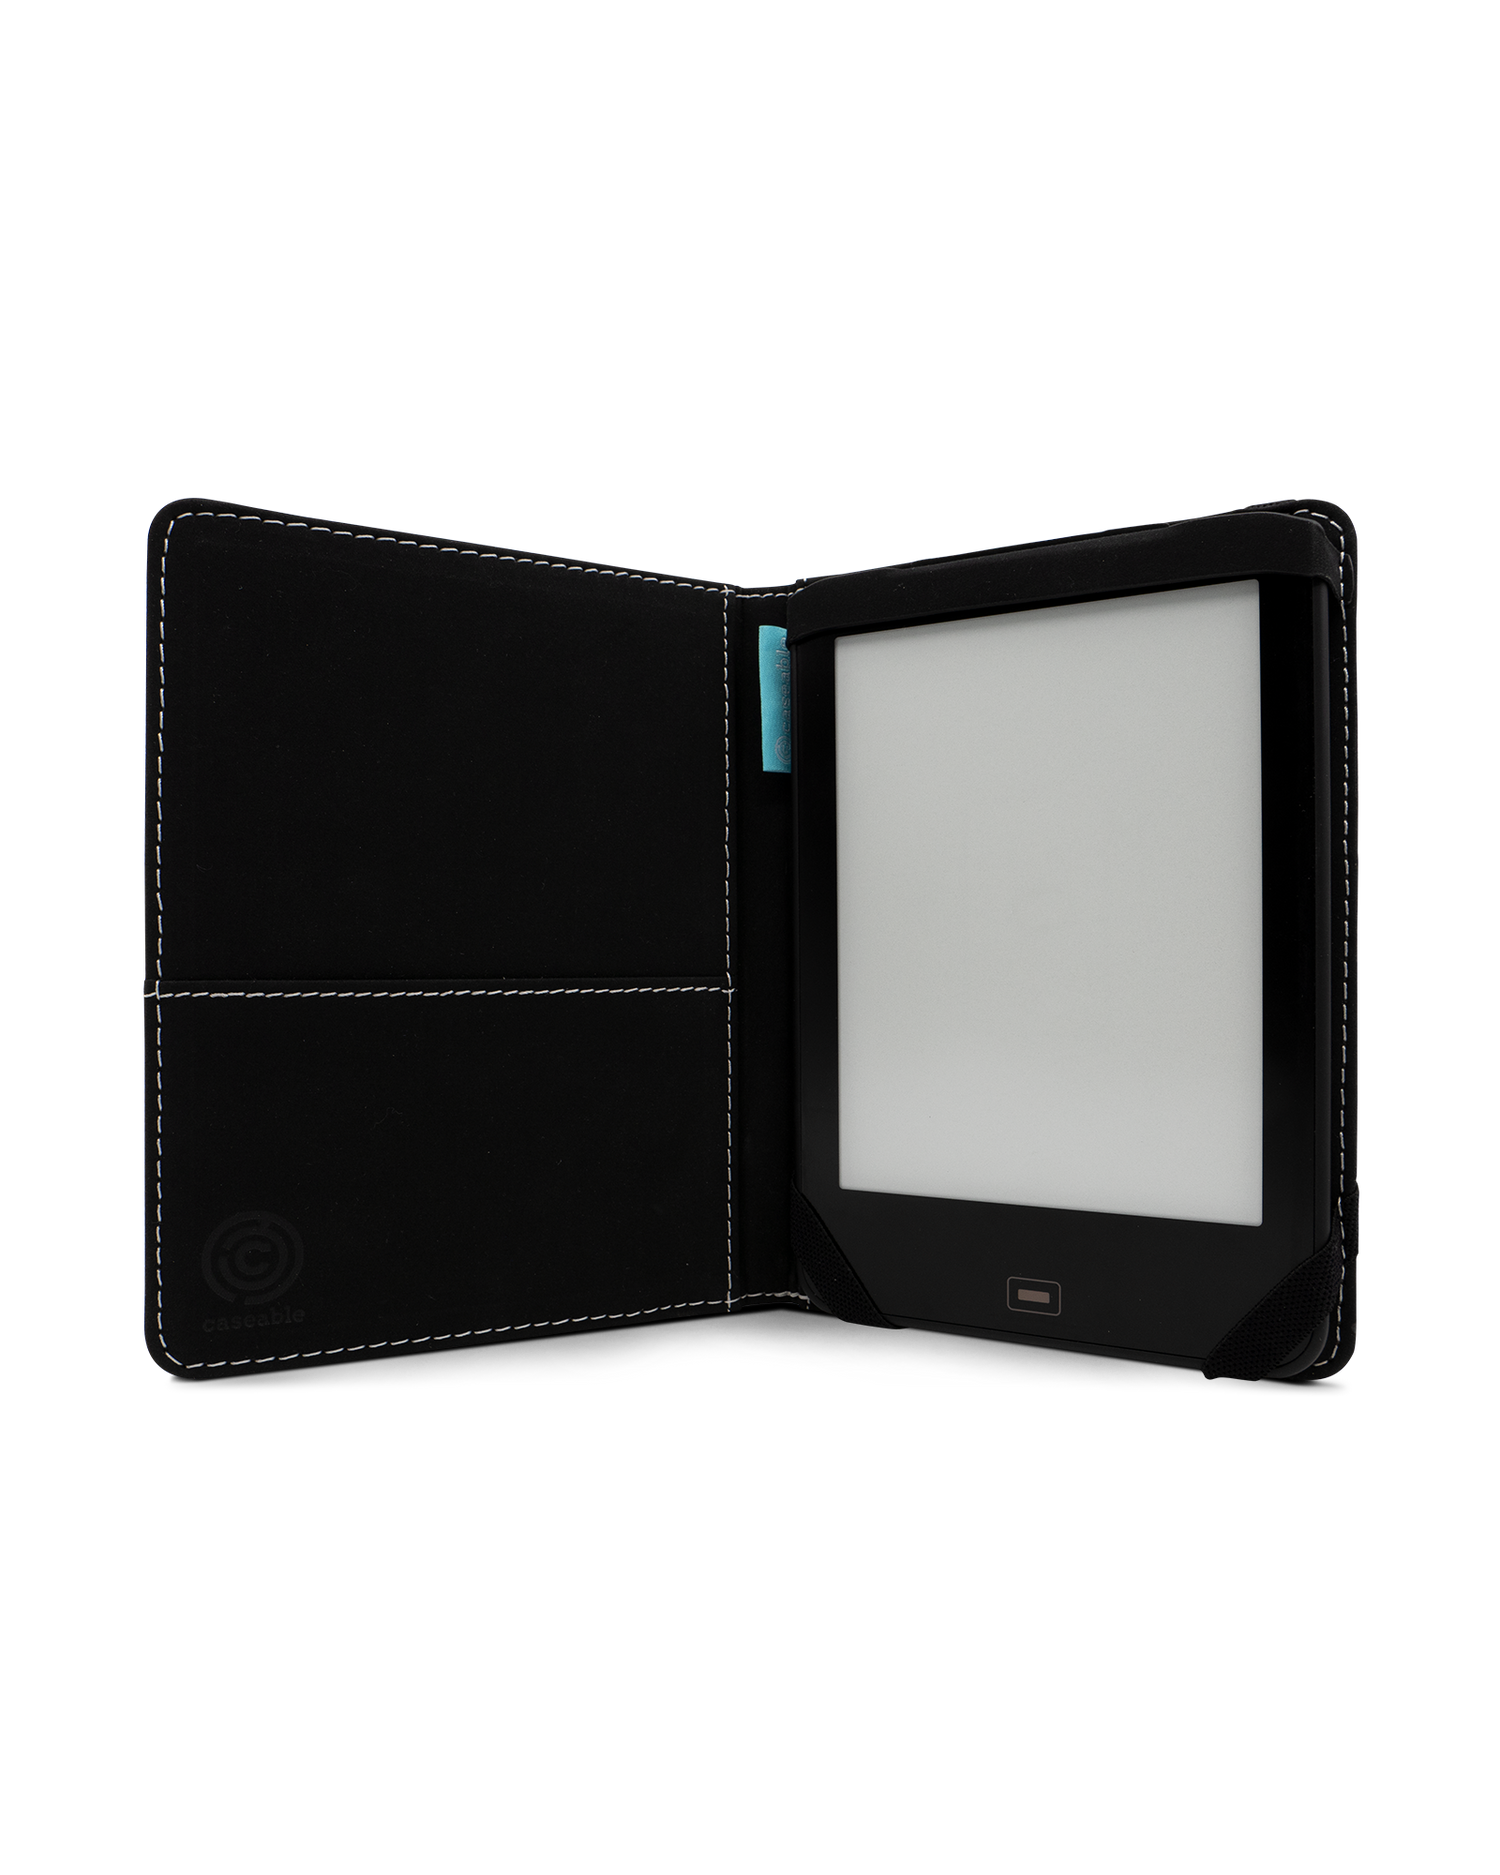 Eclipse eReader Case for tolino vision 1 to 4 HD: Opened interior view